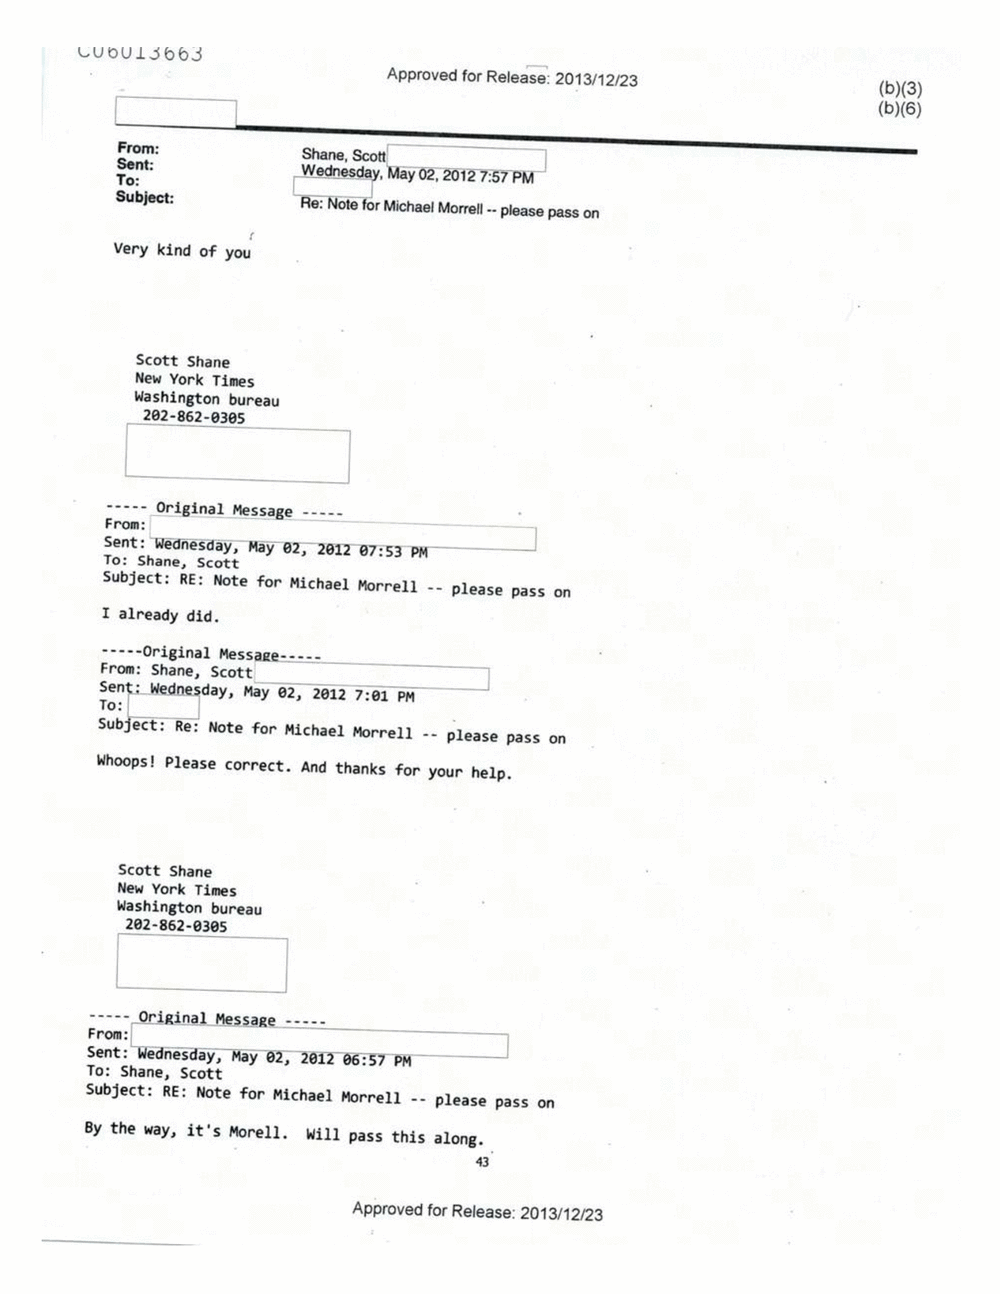 Page 508 from Email Correspondence Between Reporters and CIA Flacks